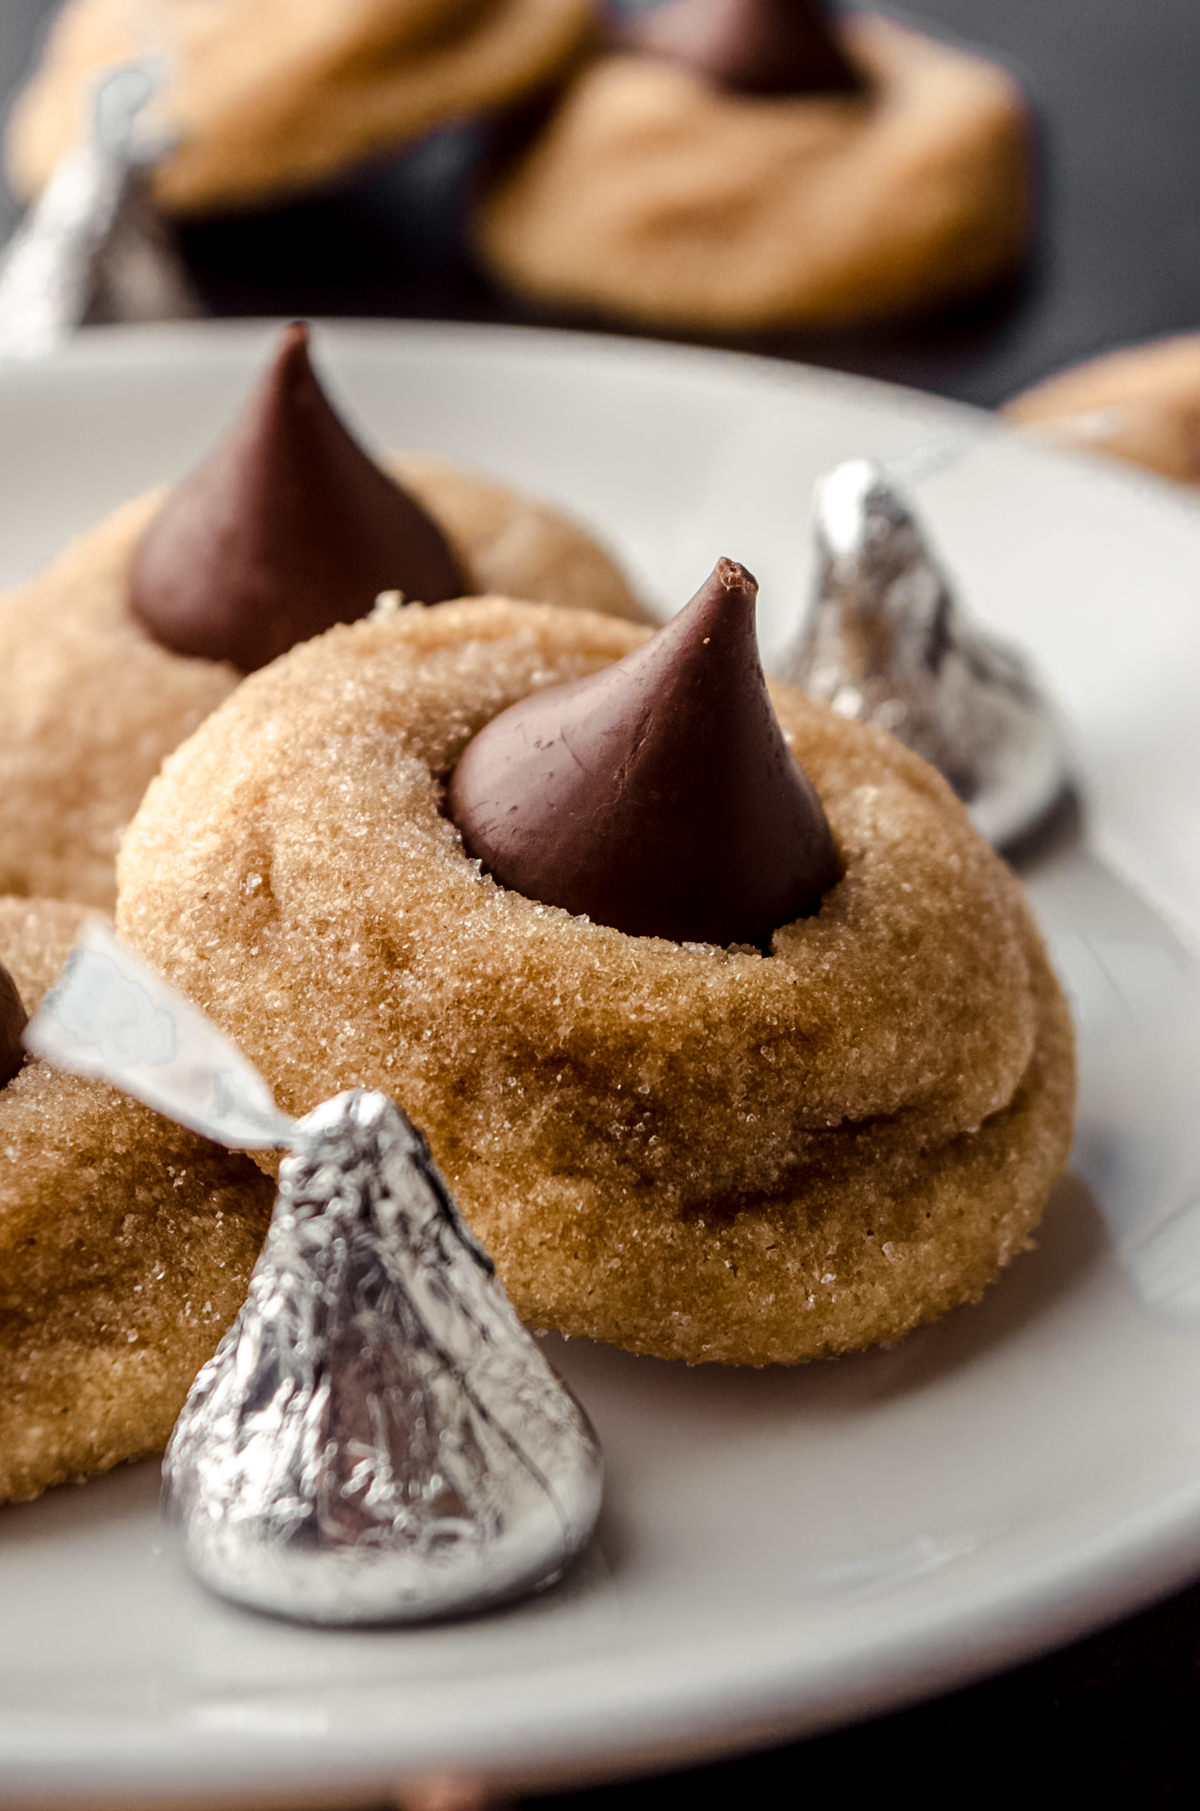 A plate of peanut butter blossoms with Hershey's Kisses around it.